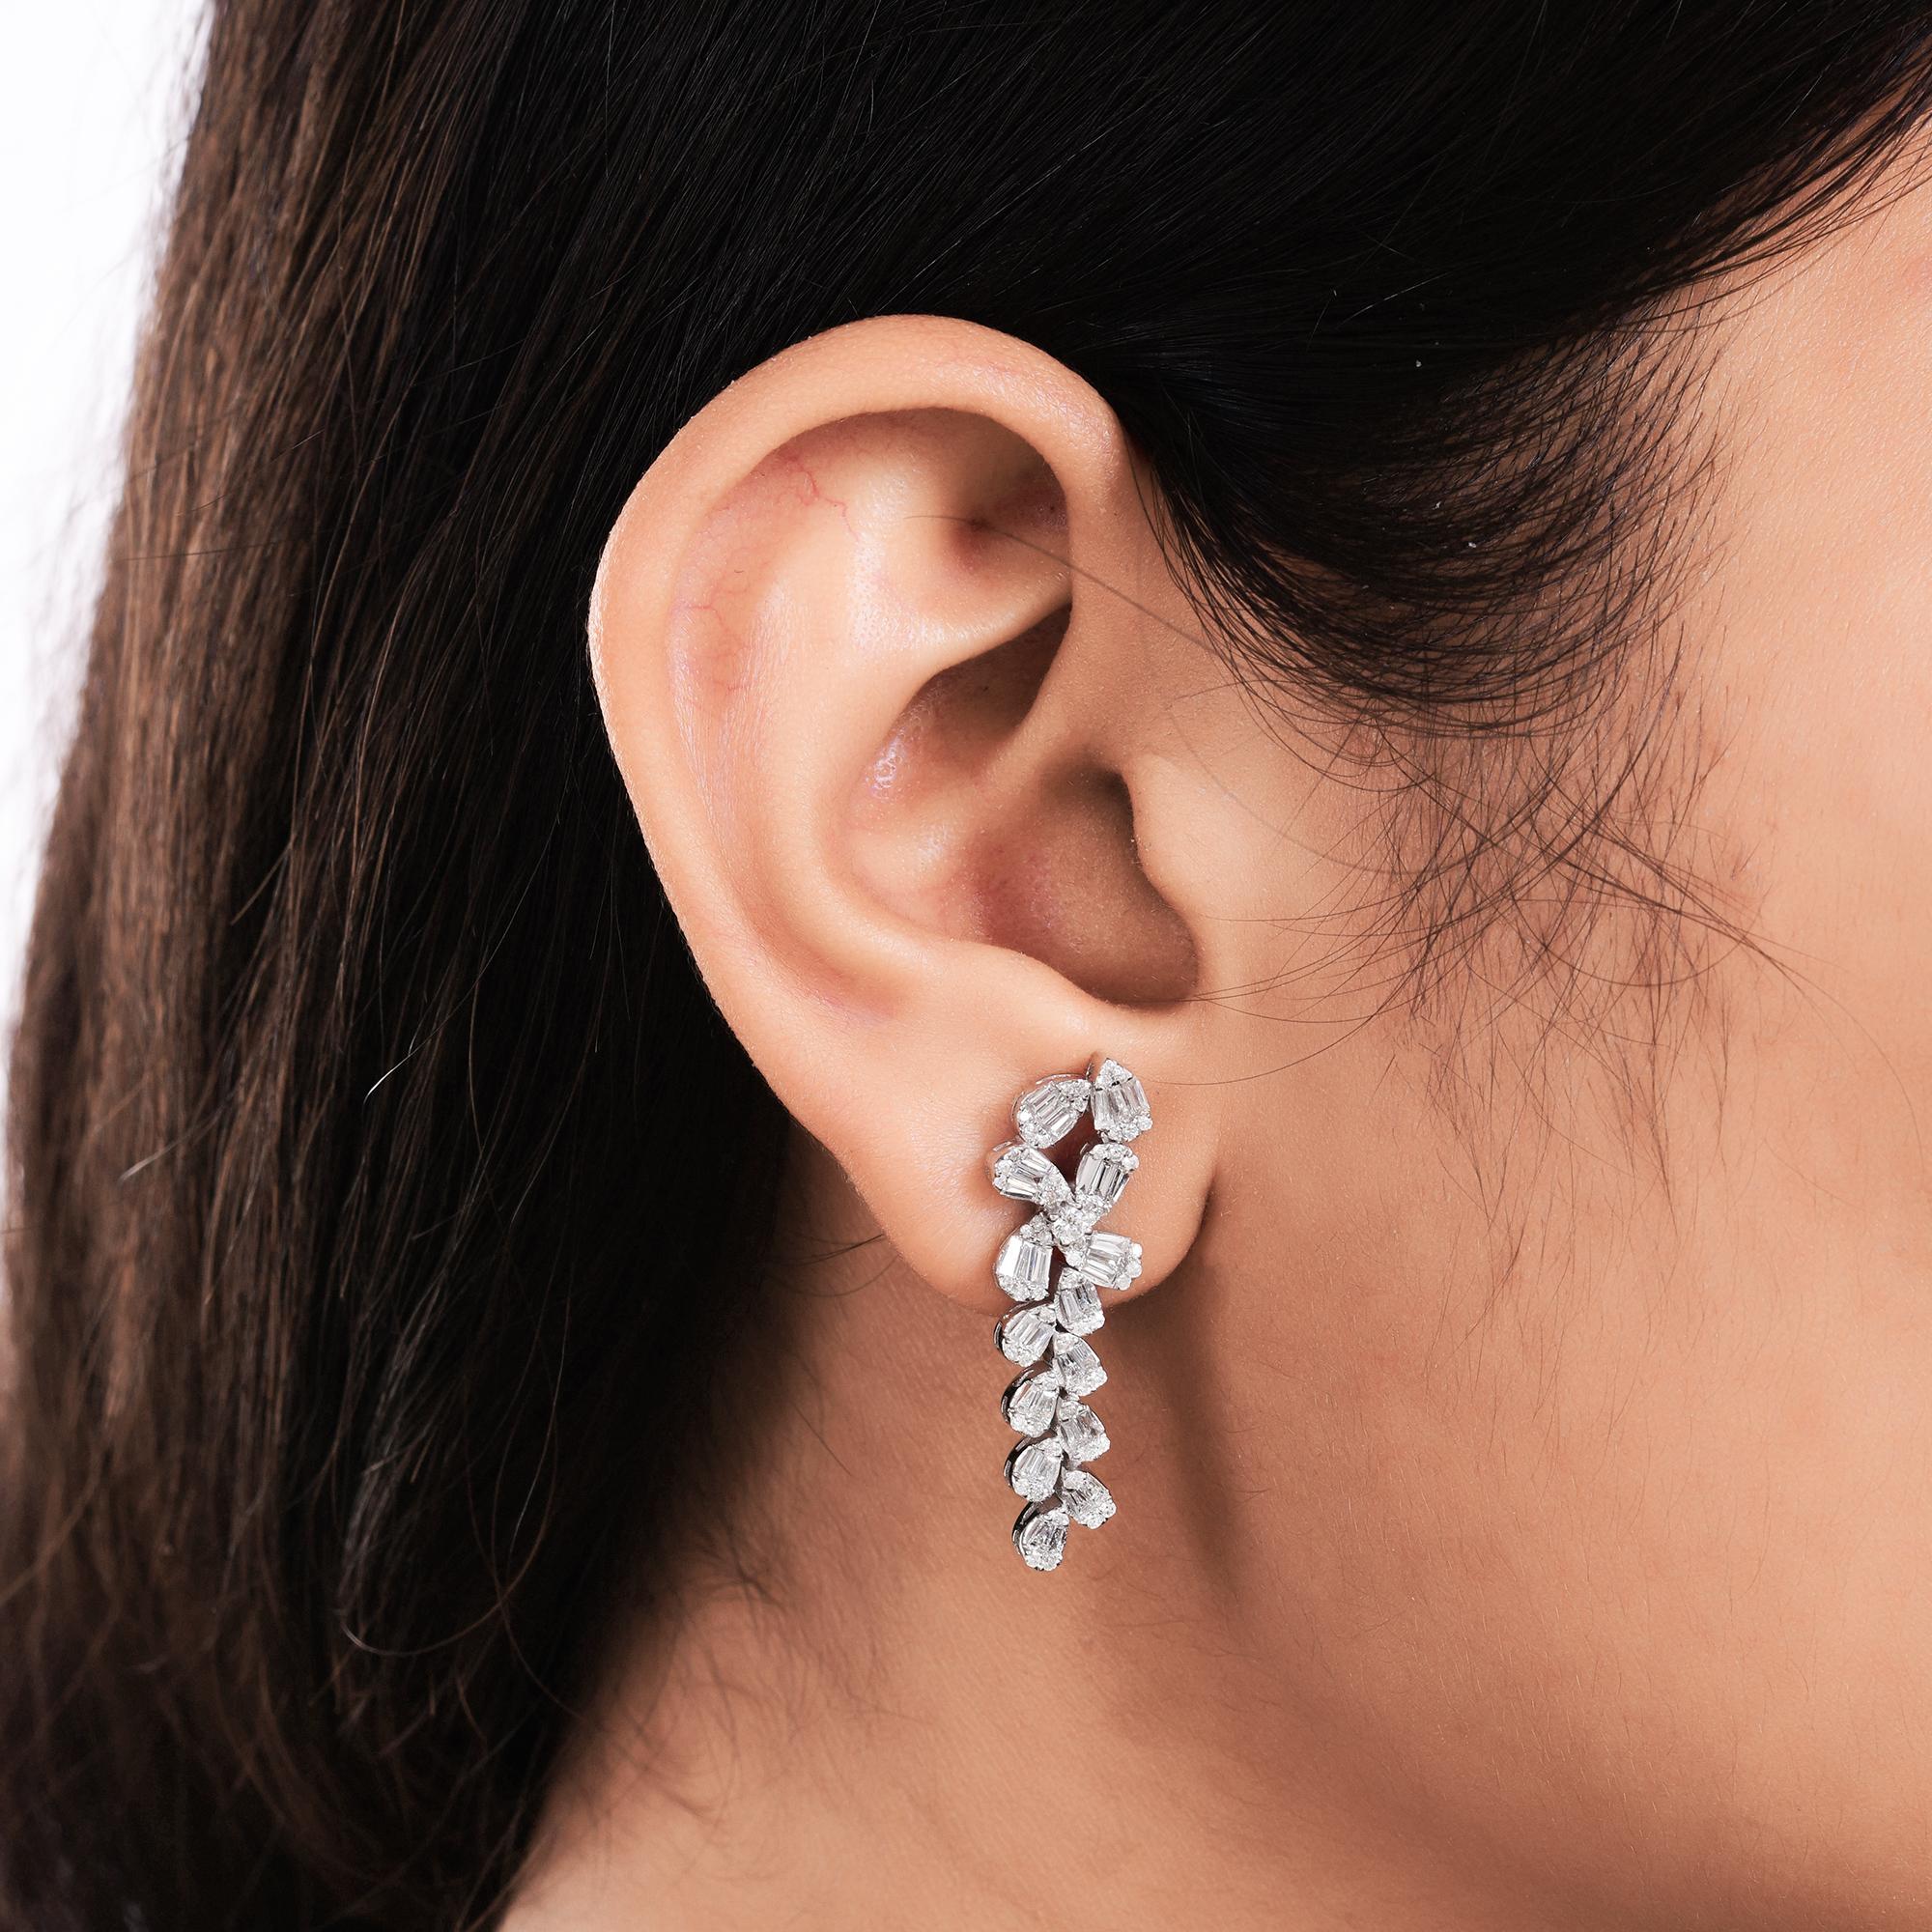 Each earring features a stunning array of baguette-cut diamonds, renowned for their sleek and elongated silhouette. These diamonds showcase SI clarity and HI color, ensuring a mesmerizing brilliance that catches the light with every movement. The